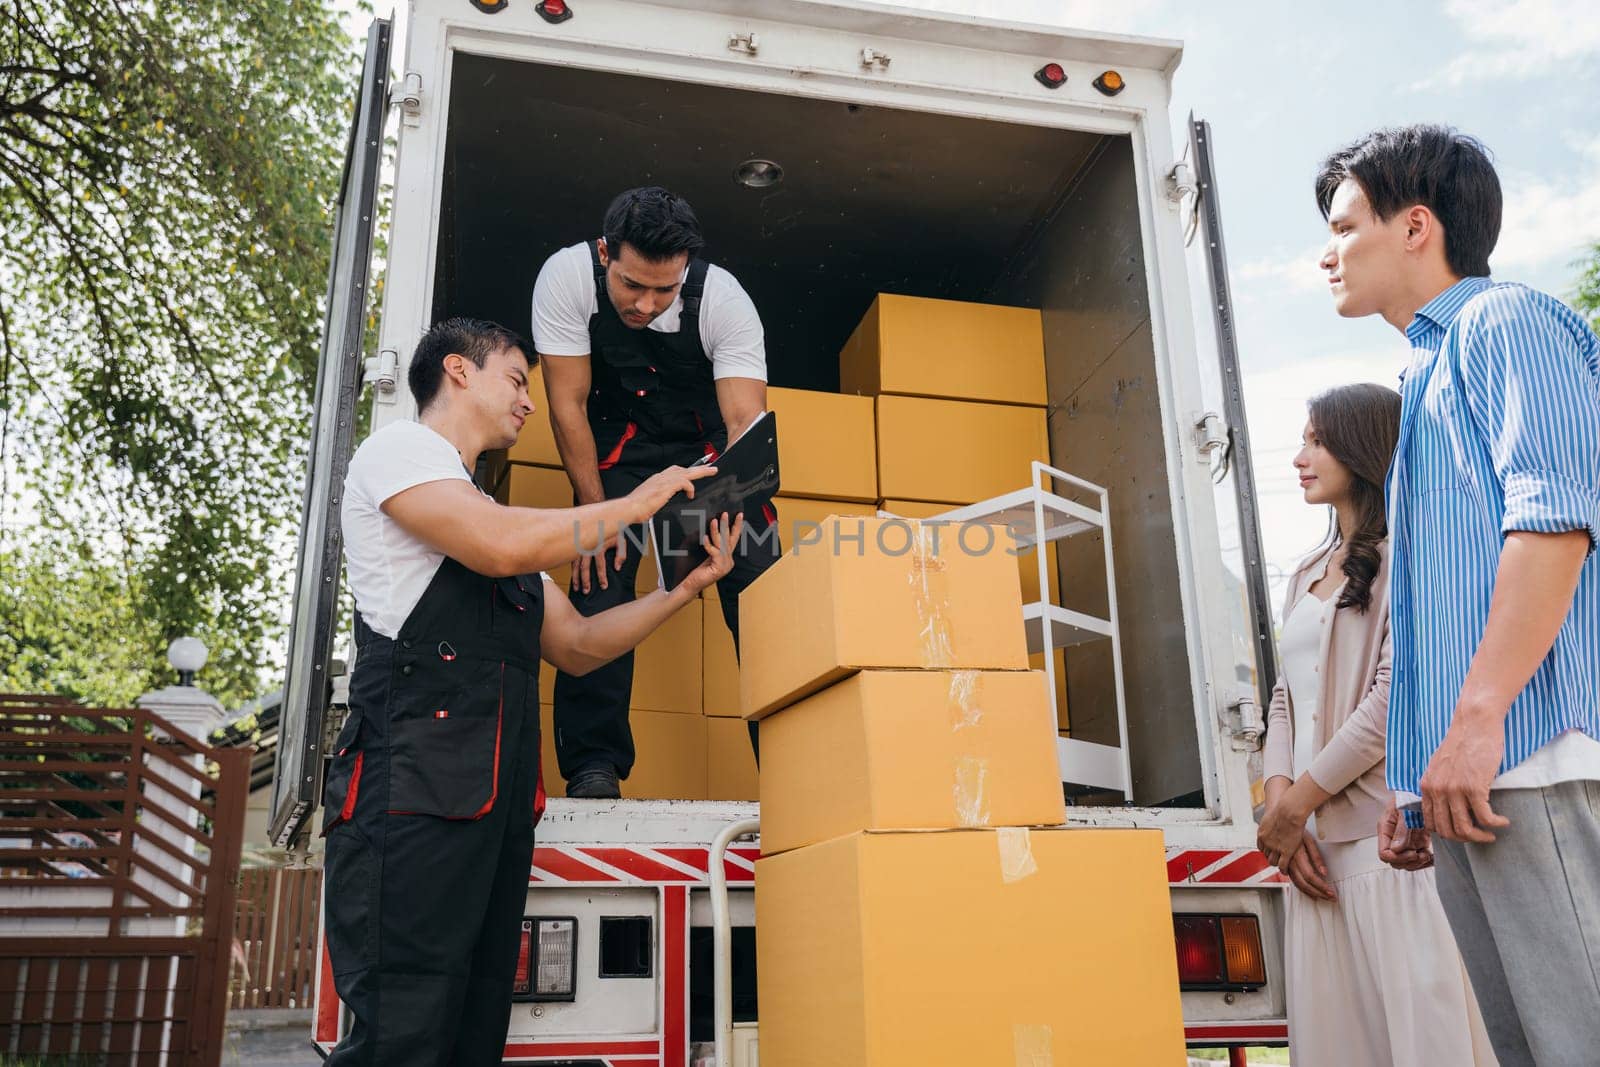 Newlywed couple satisfied signs delivery checklist with professional movers after furniture upload. Employees in uniform display teamwork for customer happiness. Moving Day Concept by Sorapop